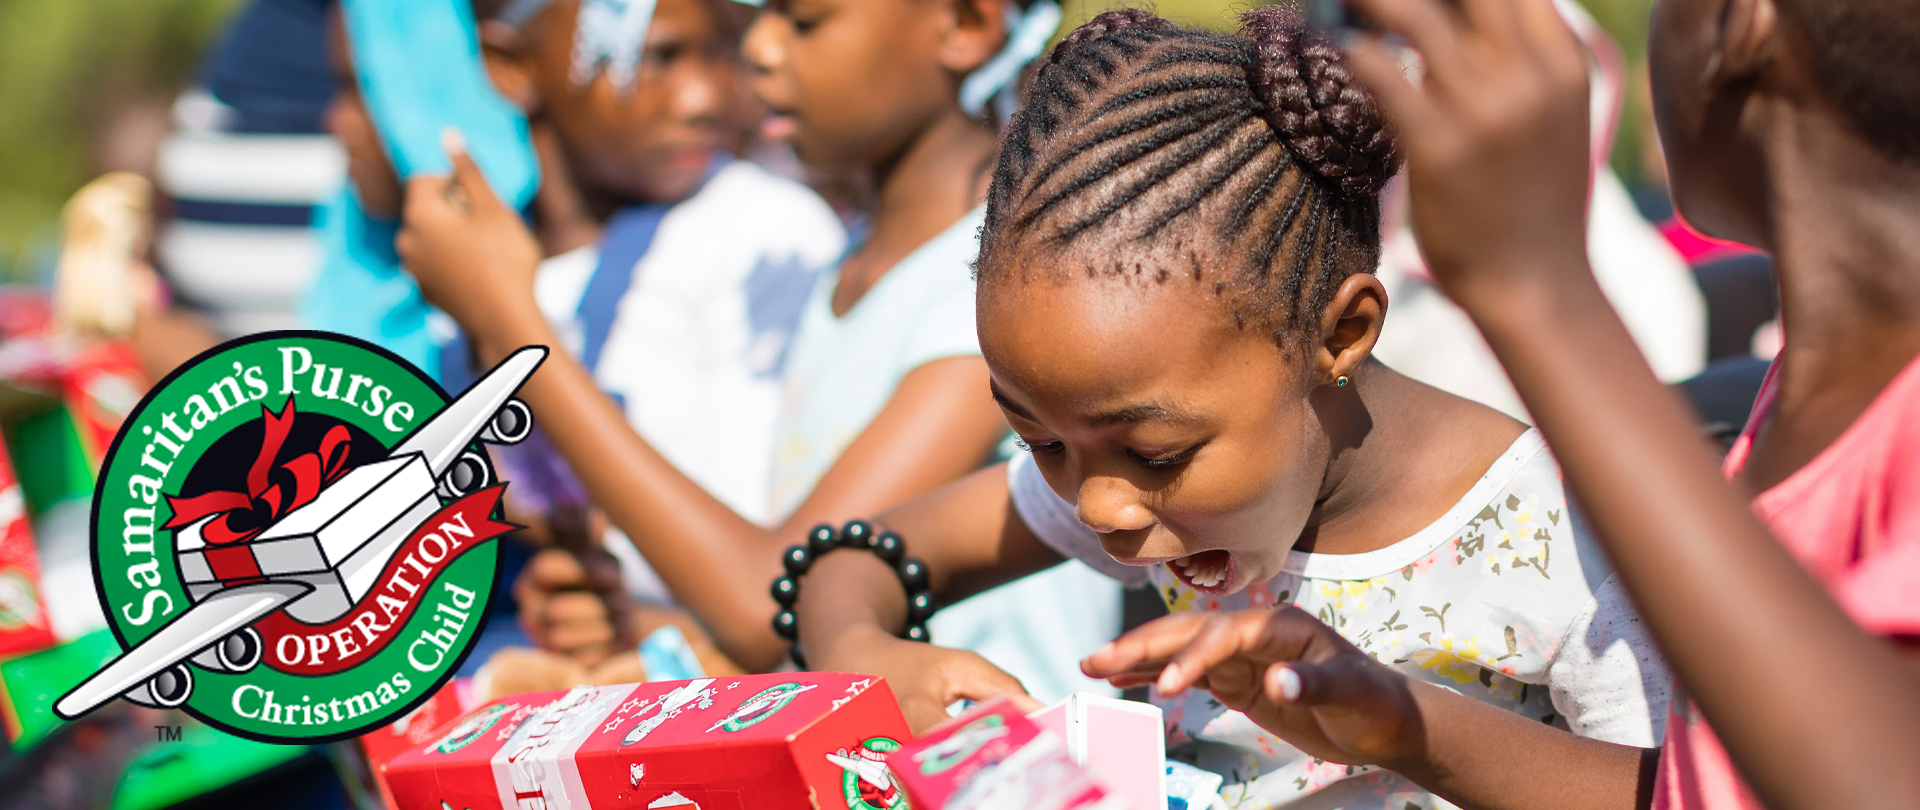 Operation Christmas Child
Pack a shoebox online
